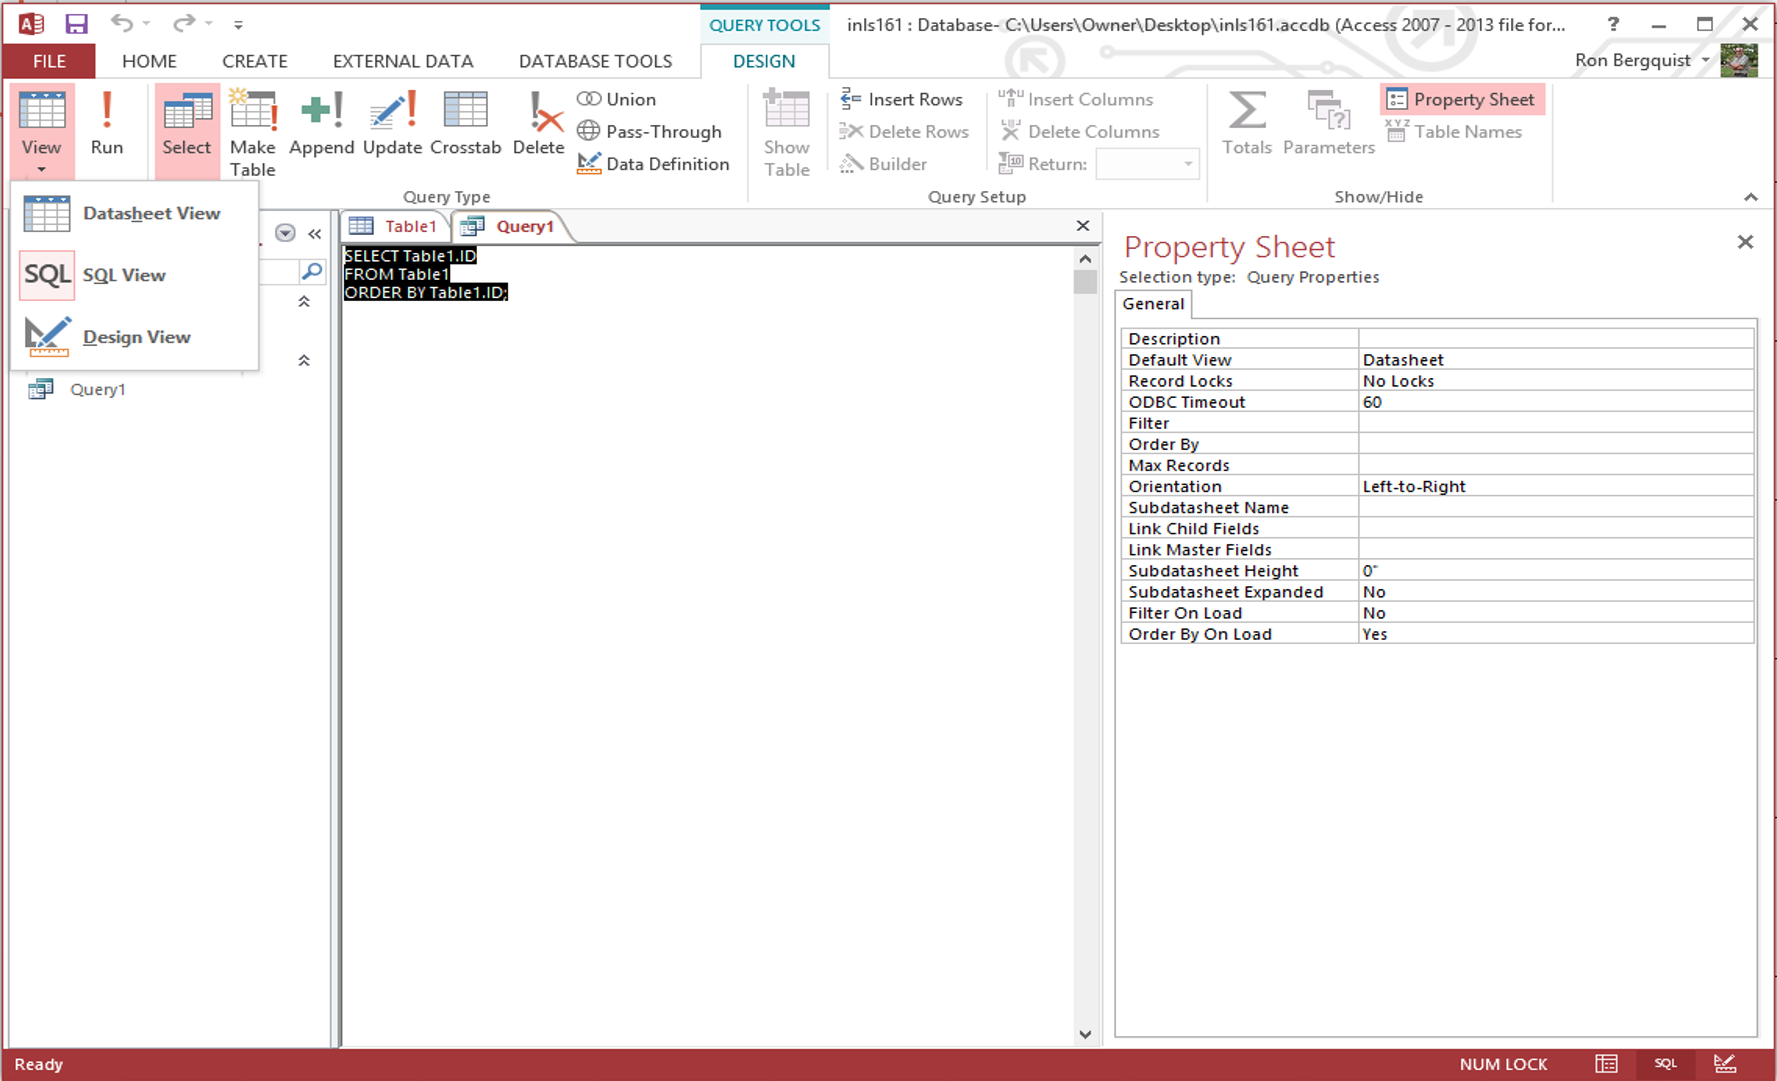 [MSAccess 2013 query SQL view]